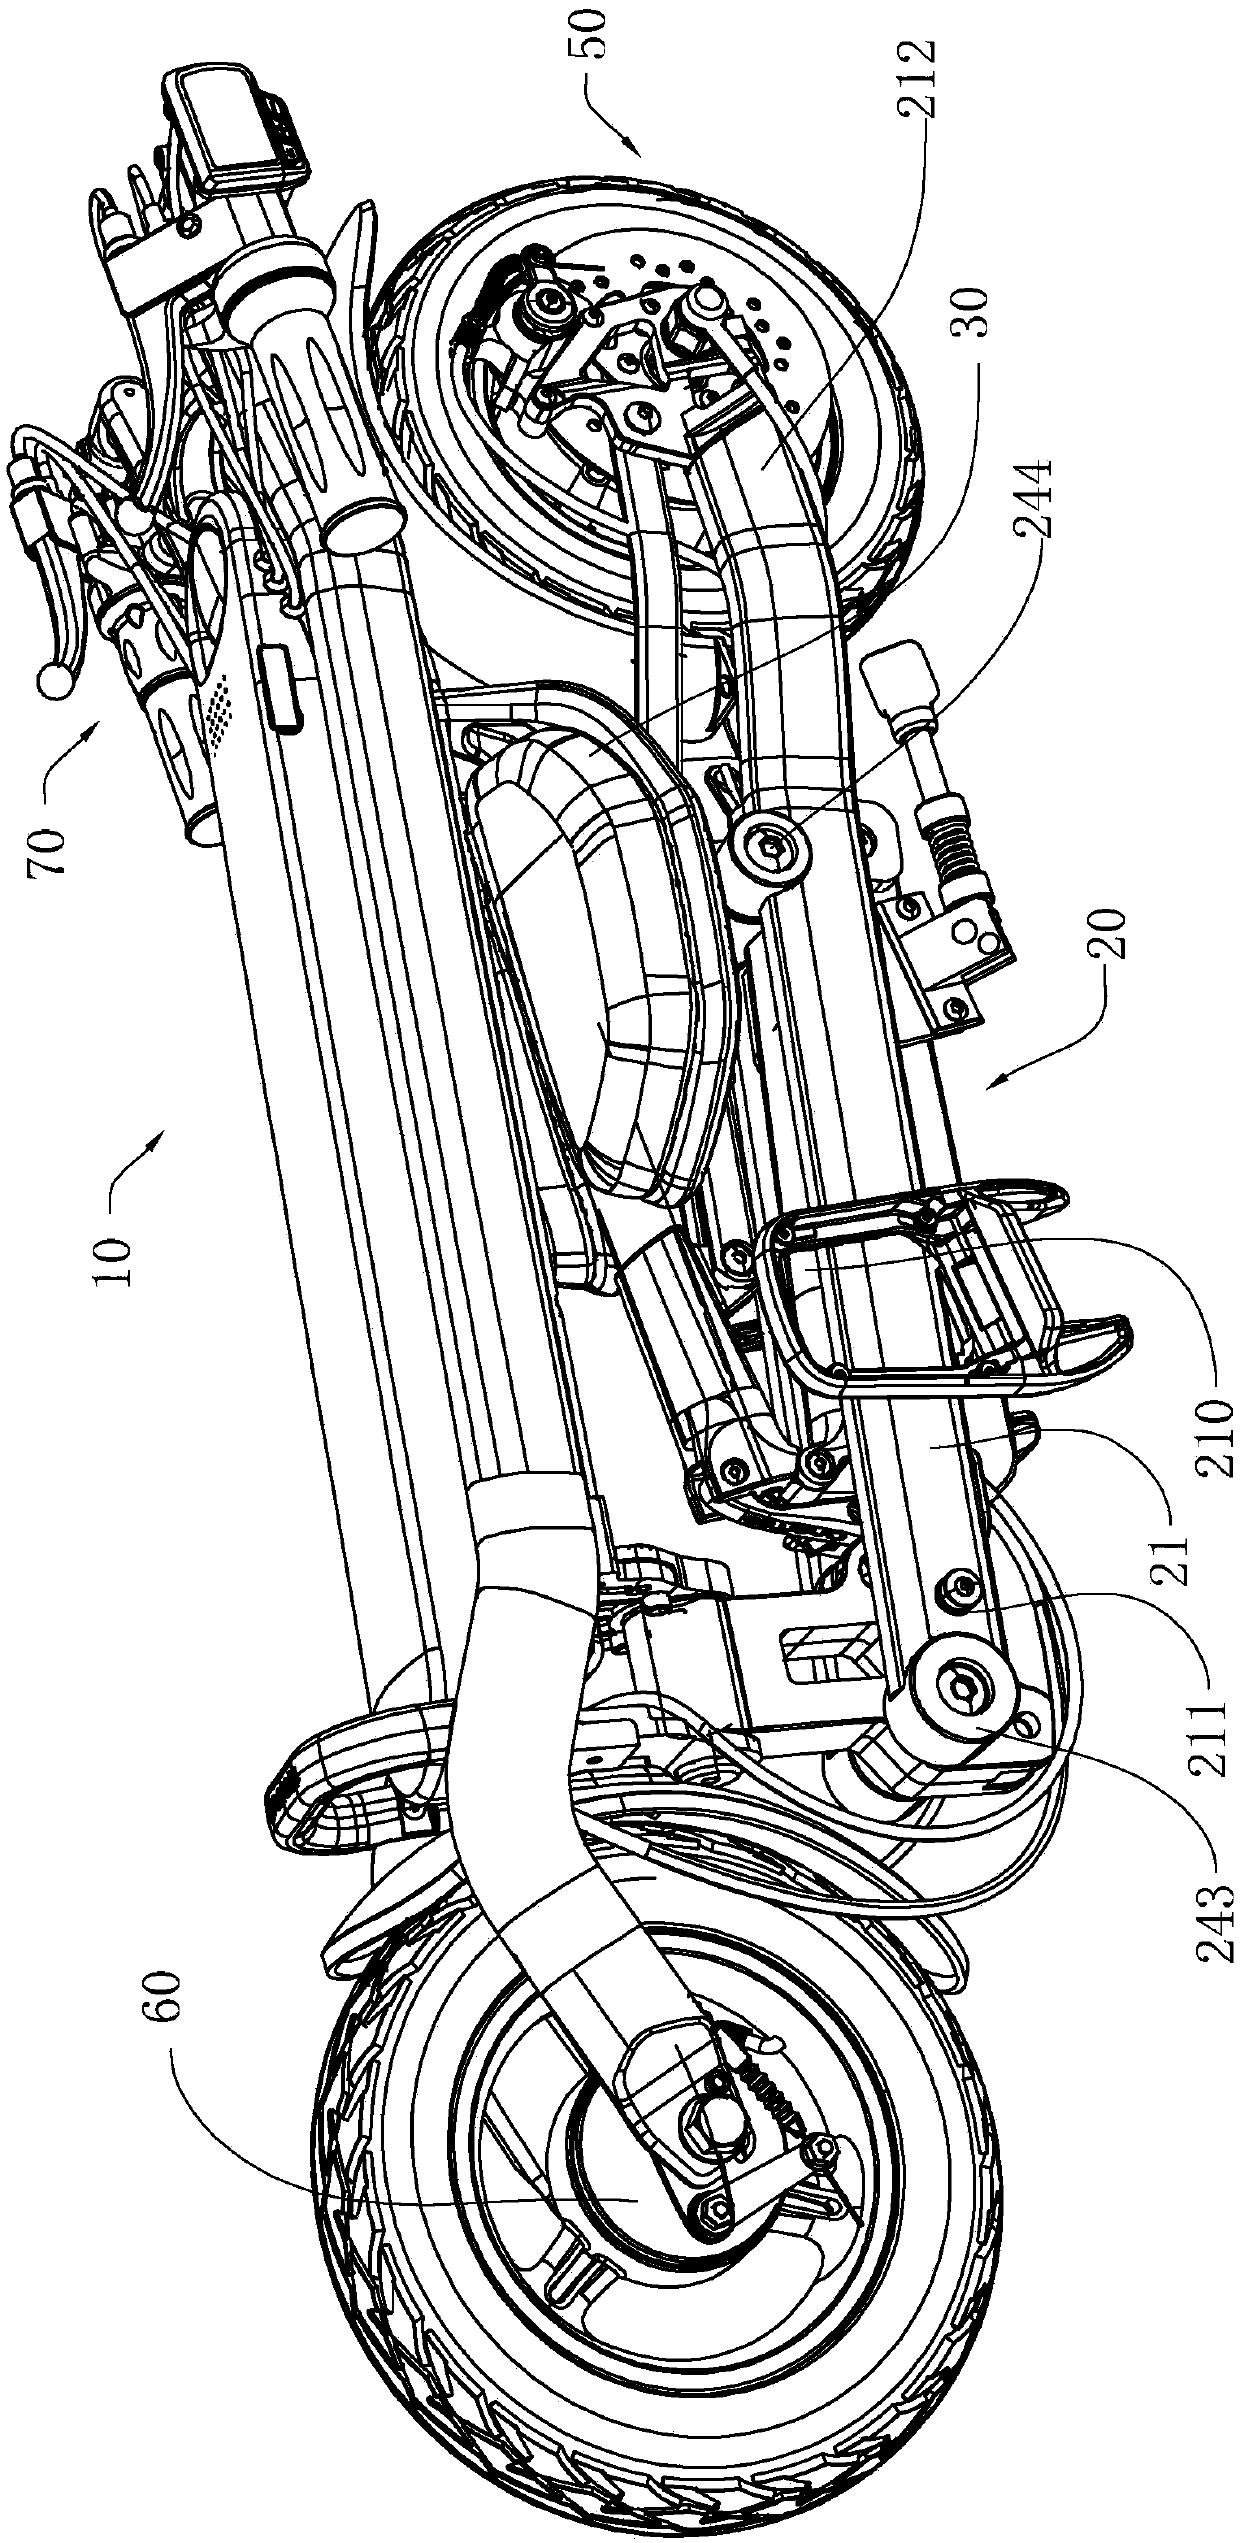 Foldable electric vehicle and frame and frame lock thereof